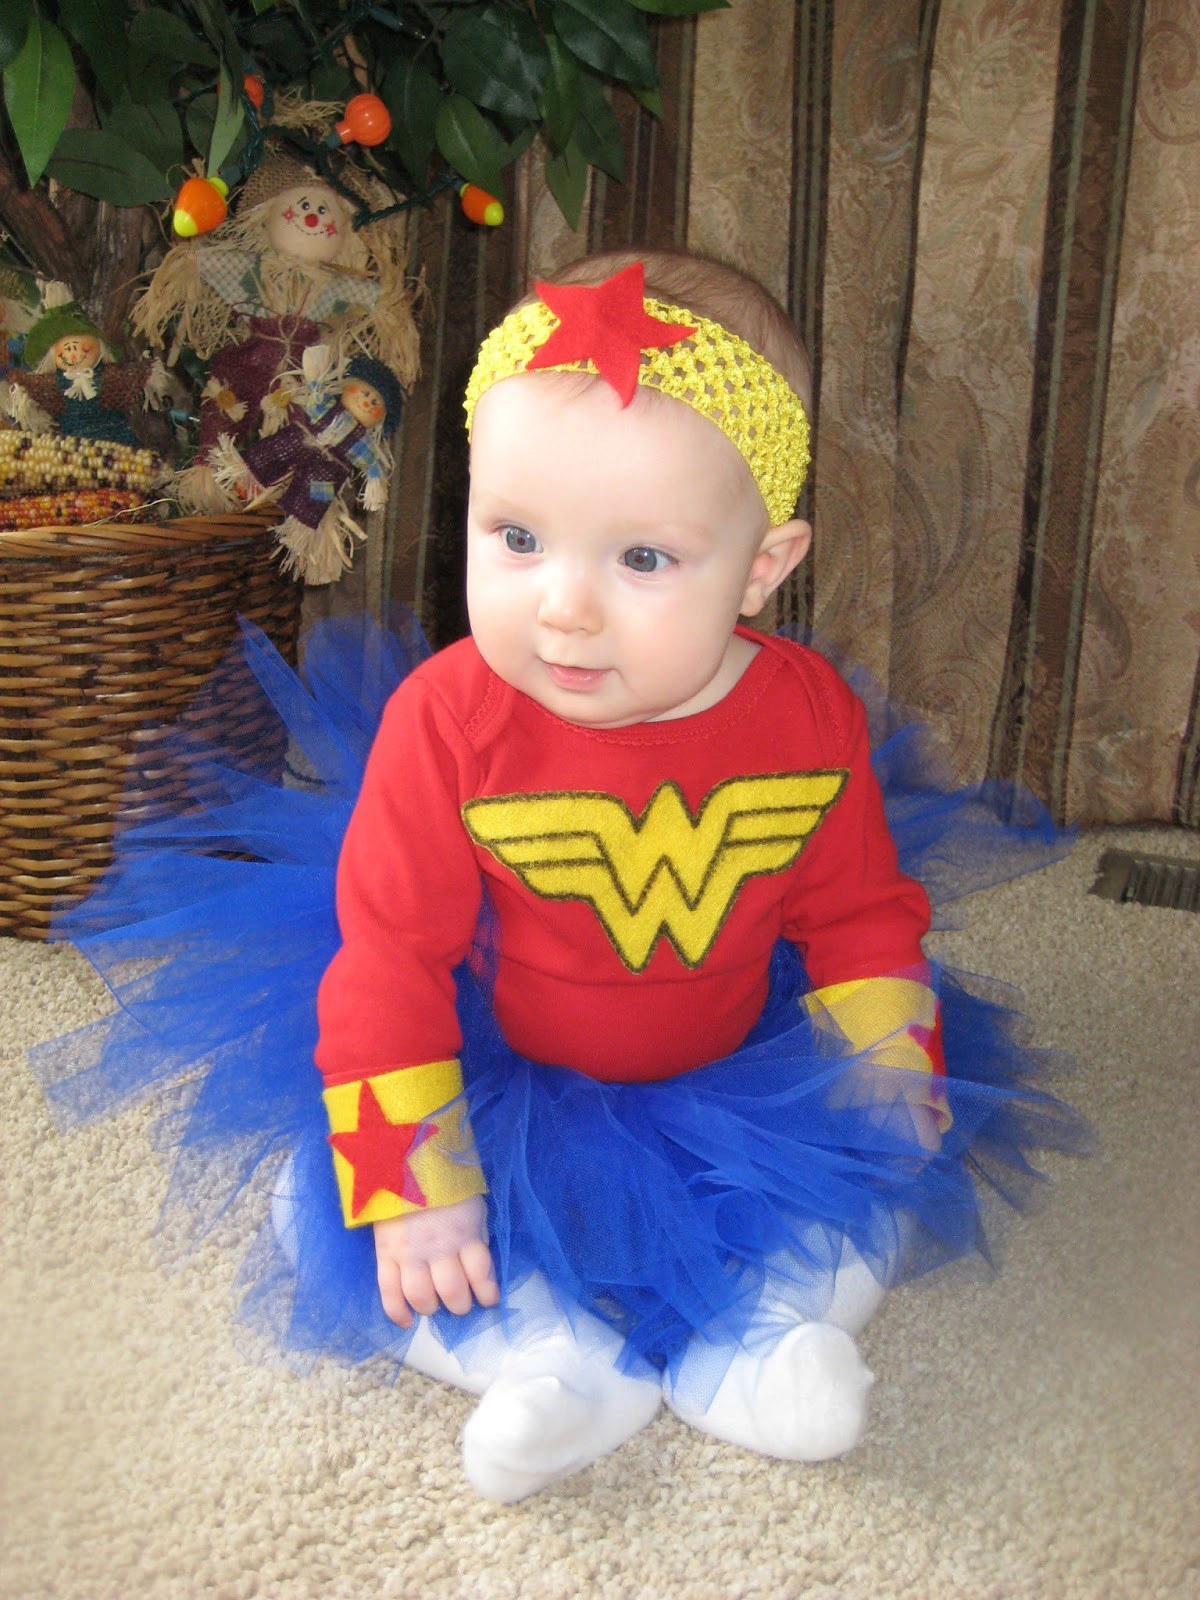 Easy DIY Costumes For Toddlers
 Sweet Little es DIY Halloween Costume Ideas